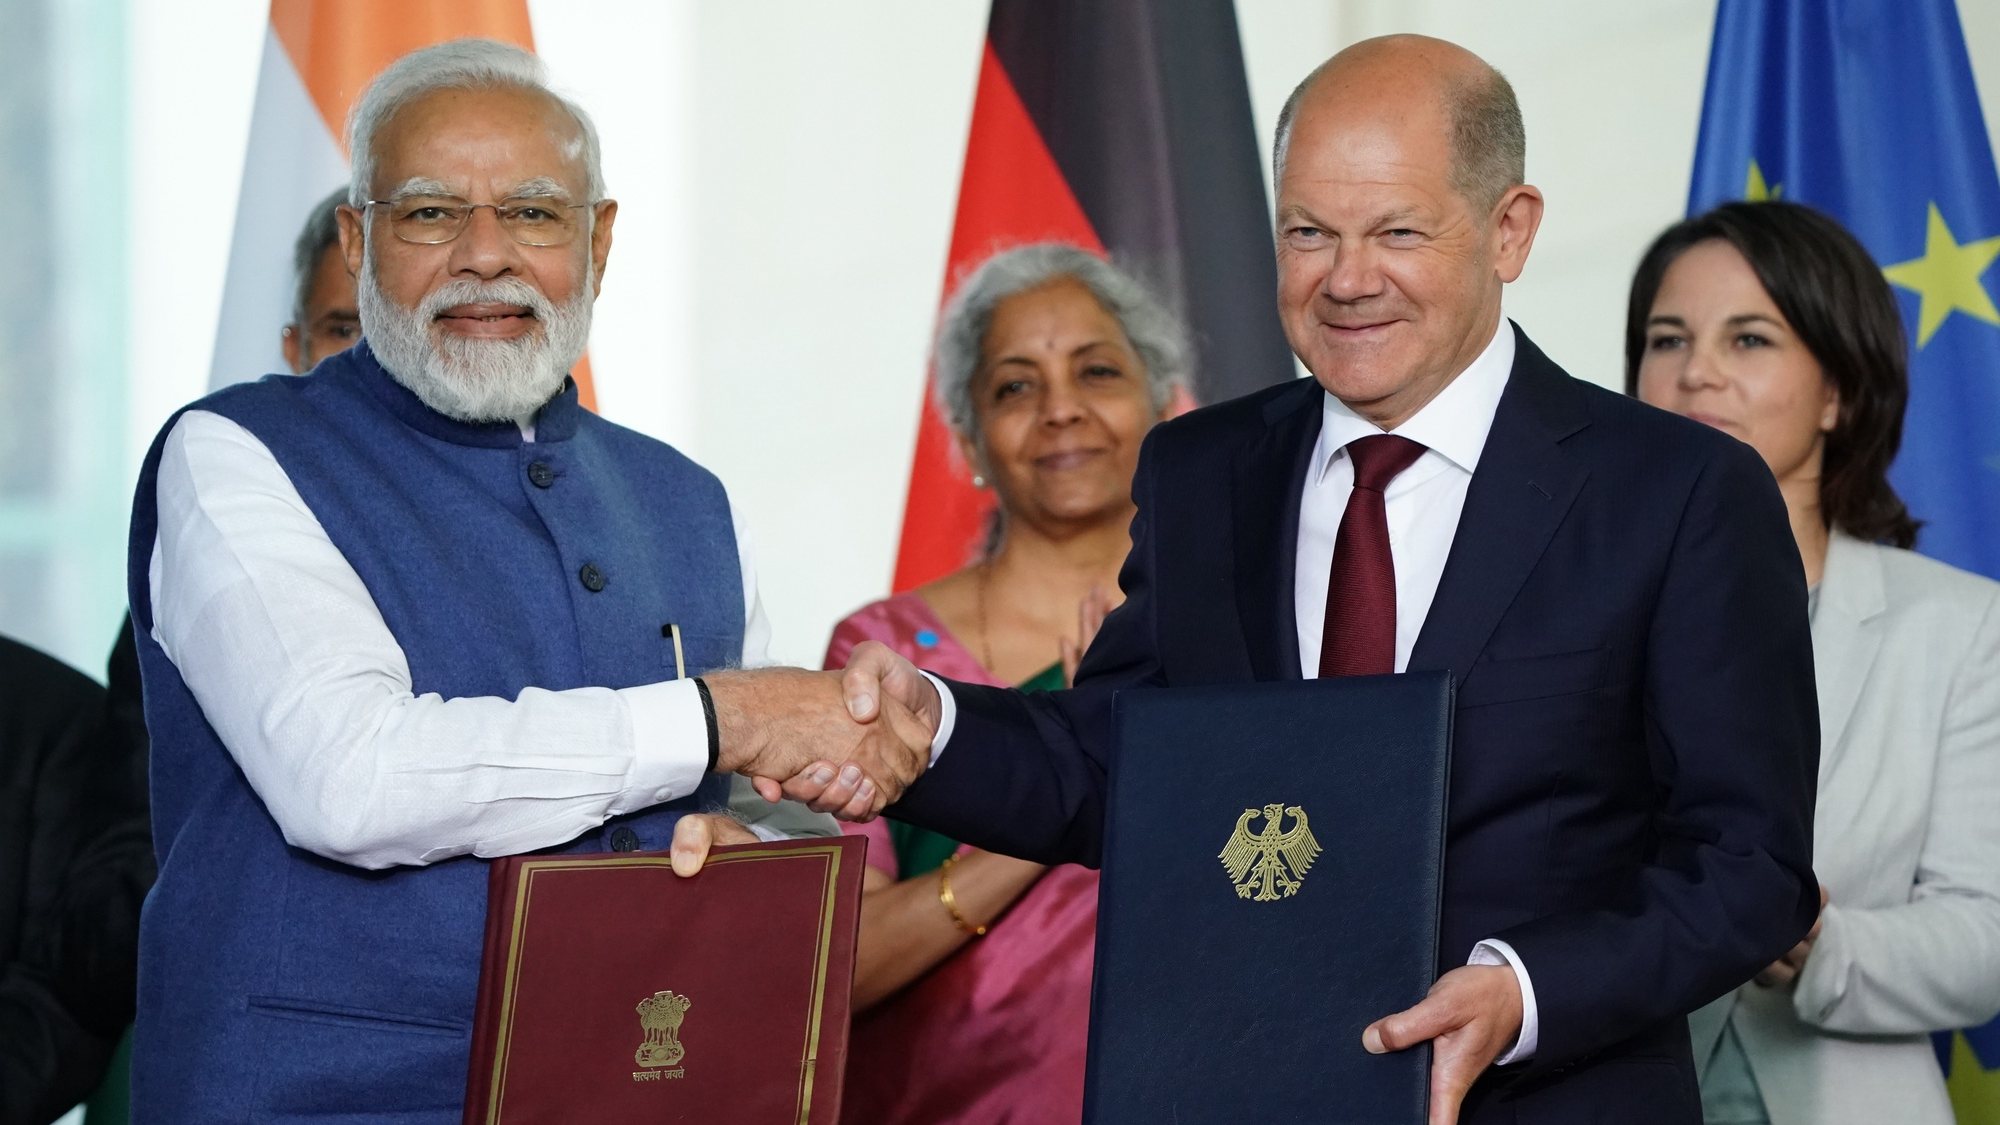 epa09922643 German Chancellor Olaf Scholz (R) and Indian Prime Minister Narendra Modi (L) shake hands after the signing of contracts at the Chancellery in Berlin, Germany, 02 May 2022. German Chancellor Olaf Scholz and Indian Prime Minister Narendra Modi met on the occasion of the 6th German-Indian Government Consultations in Berlin.  EPA/CLEMENS BILAN / POOL